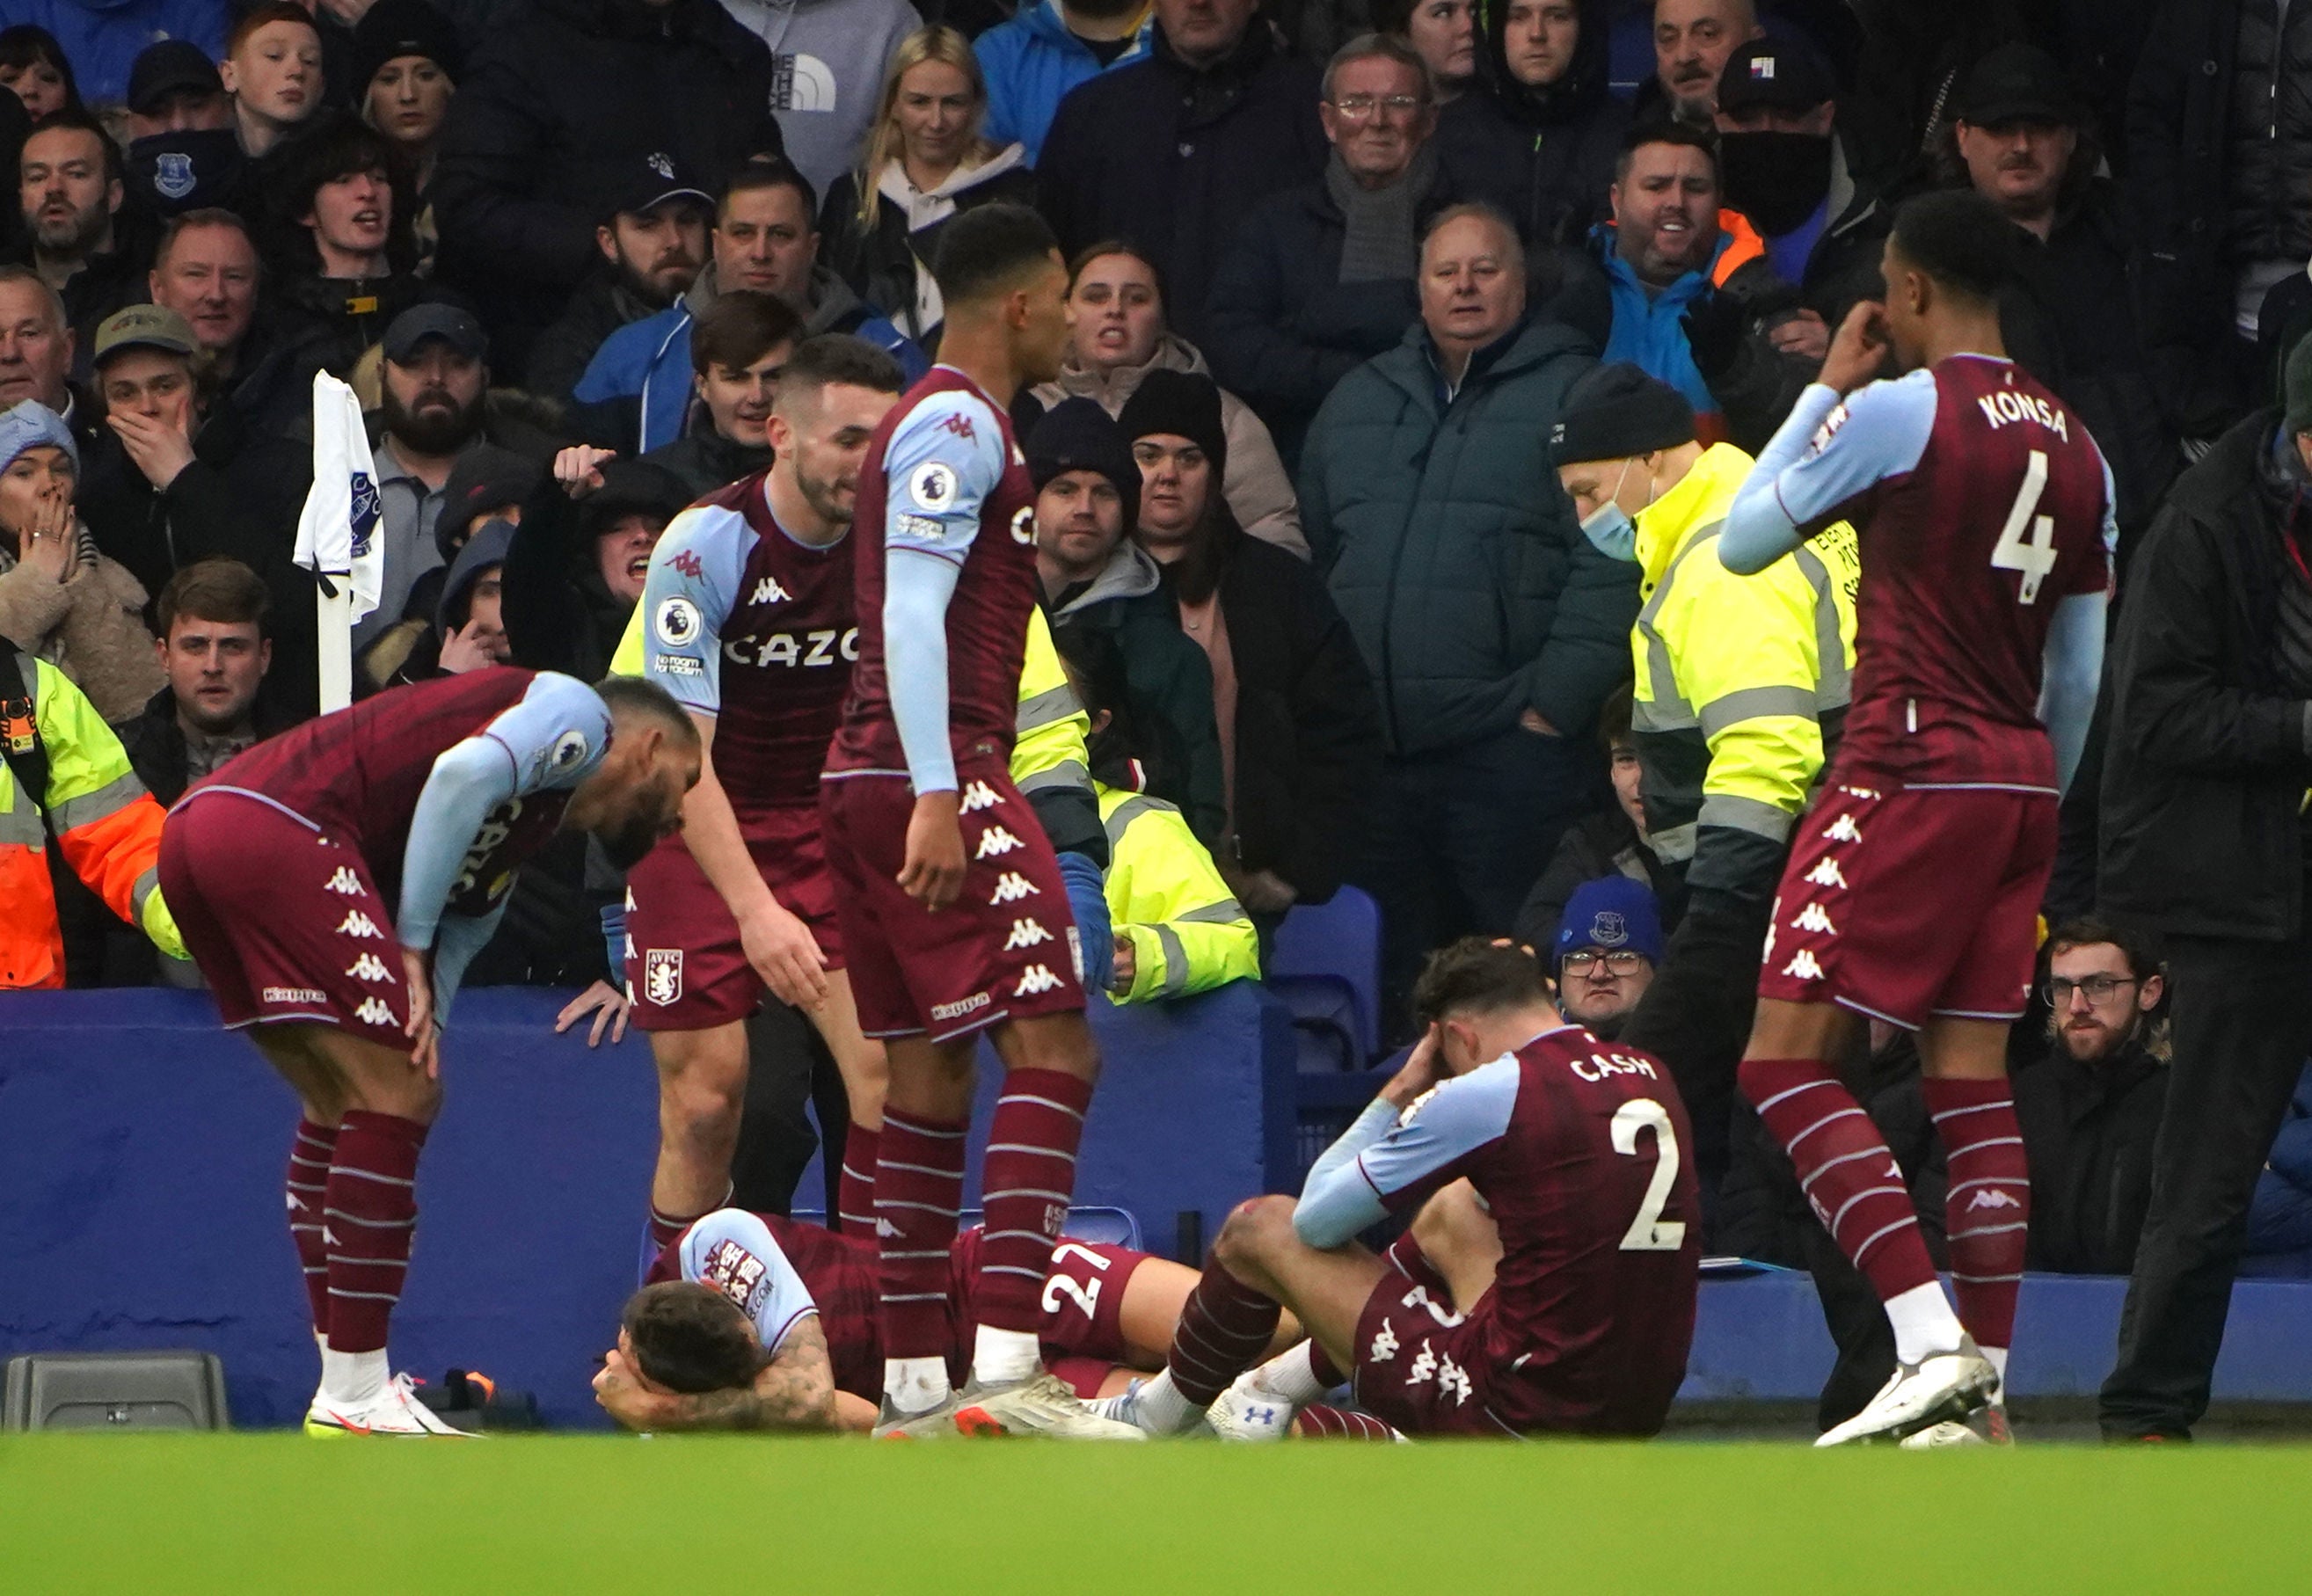 Aston Villa players react after a bottle is thrown from the stands